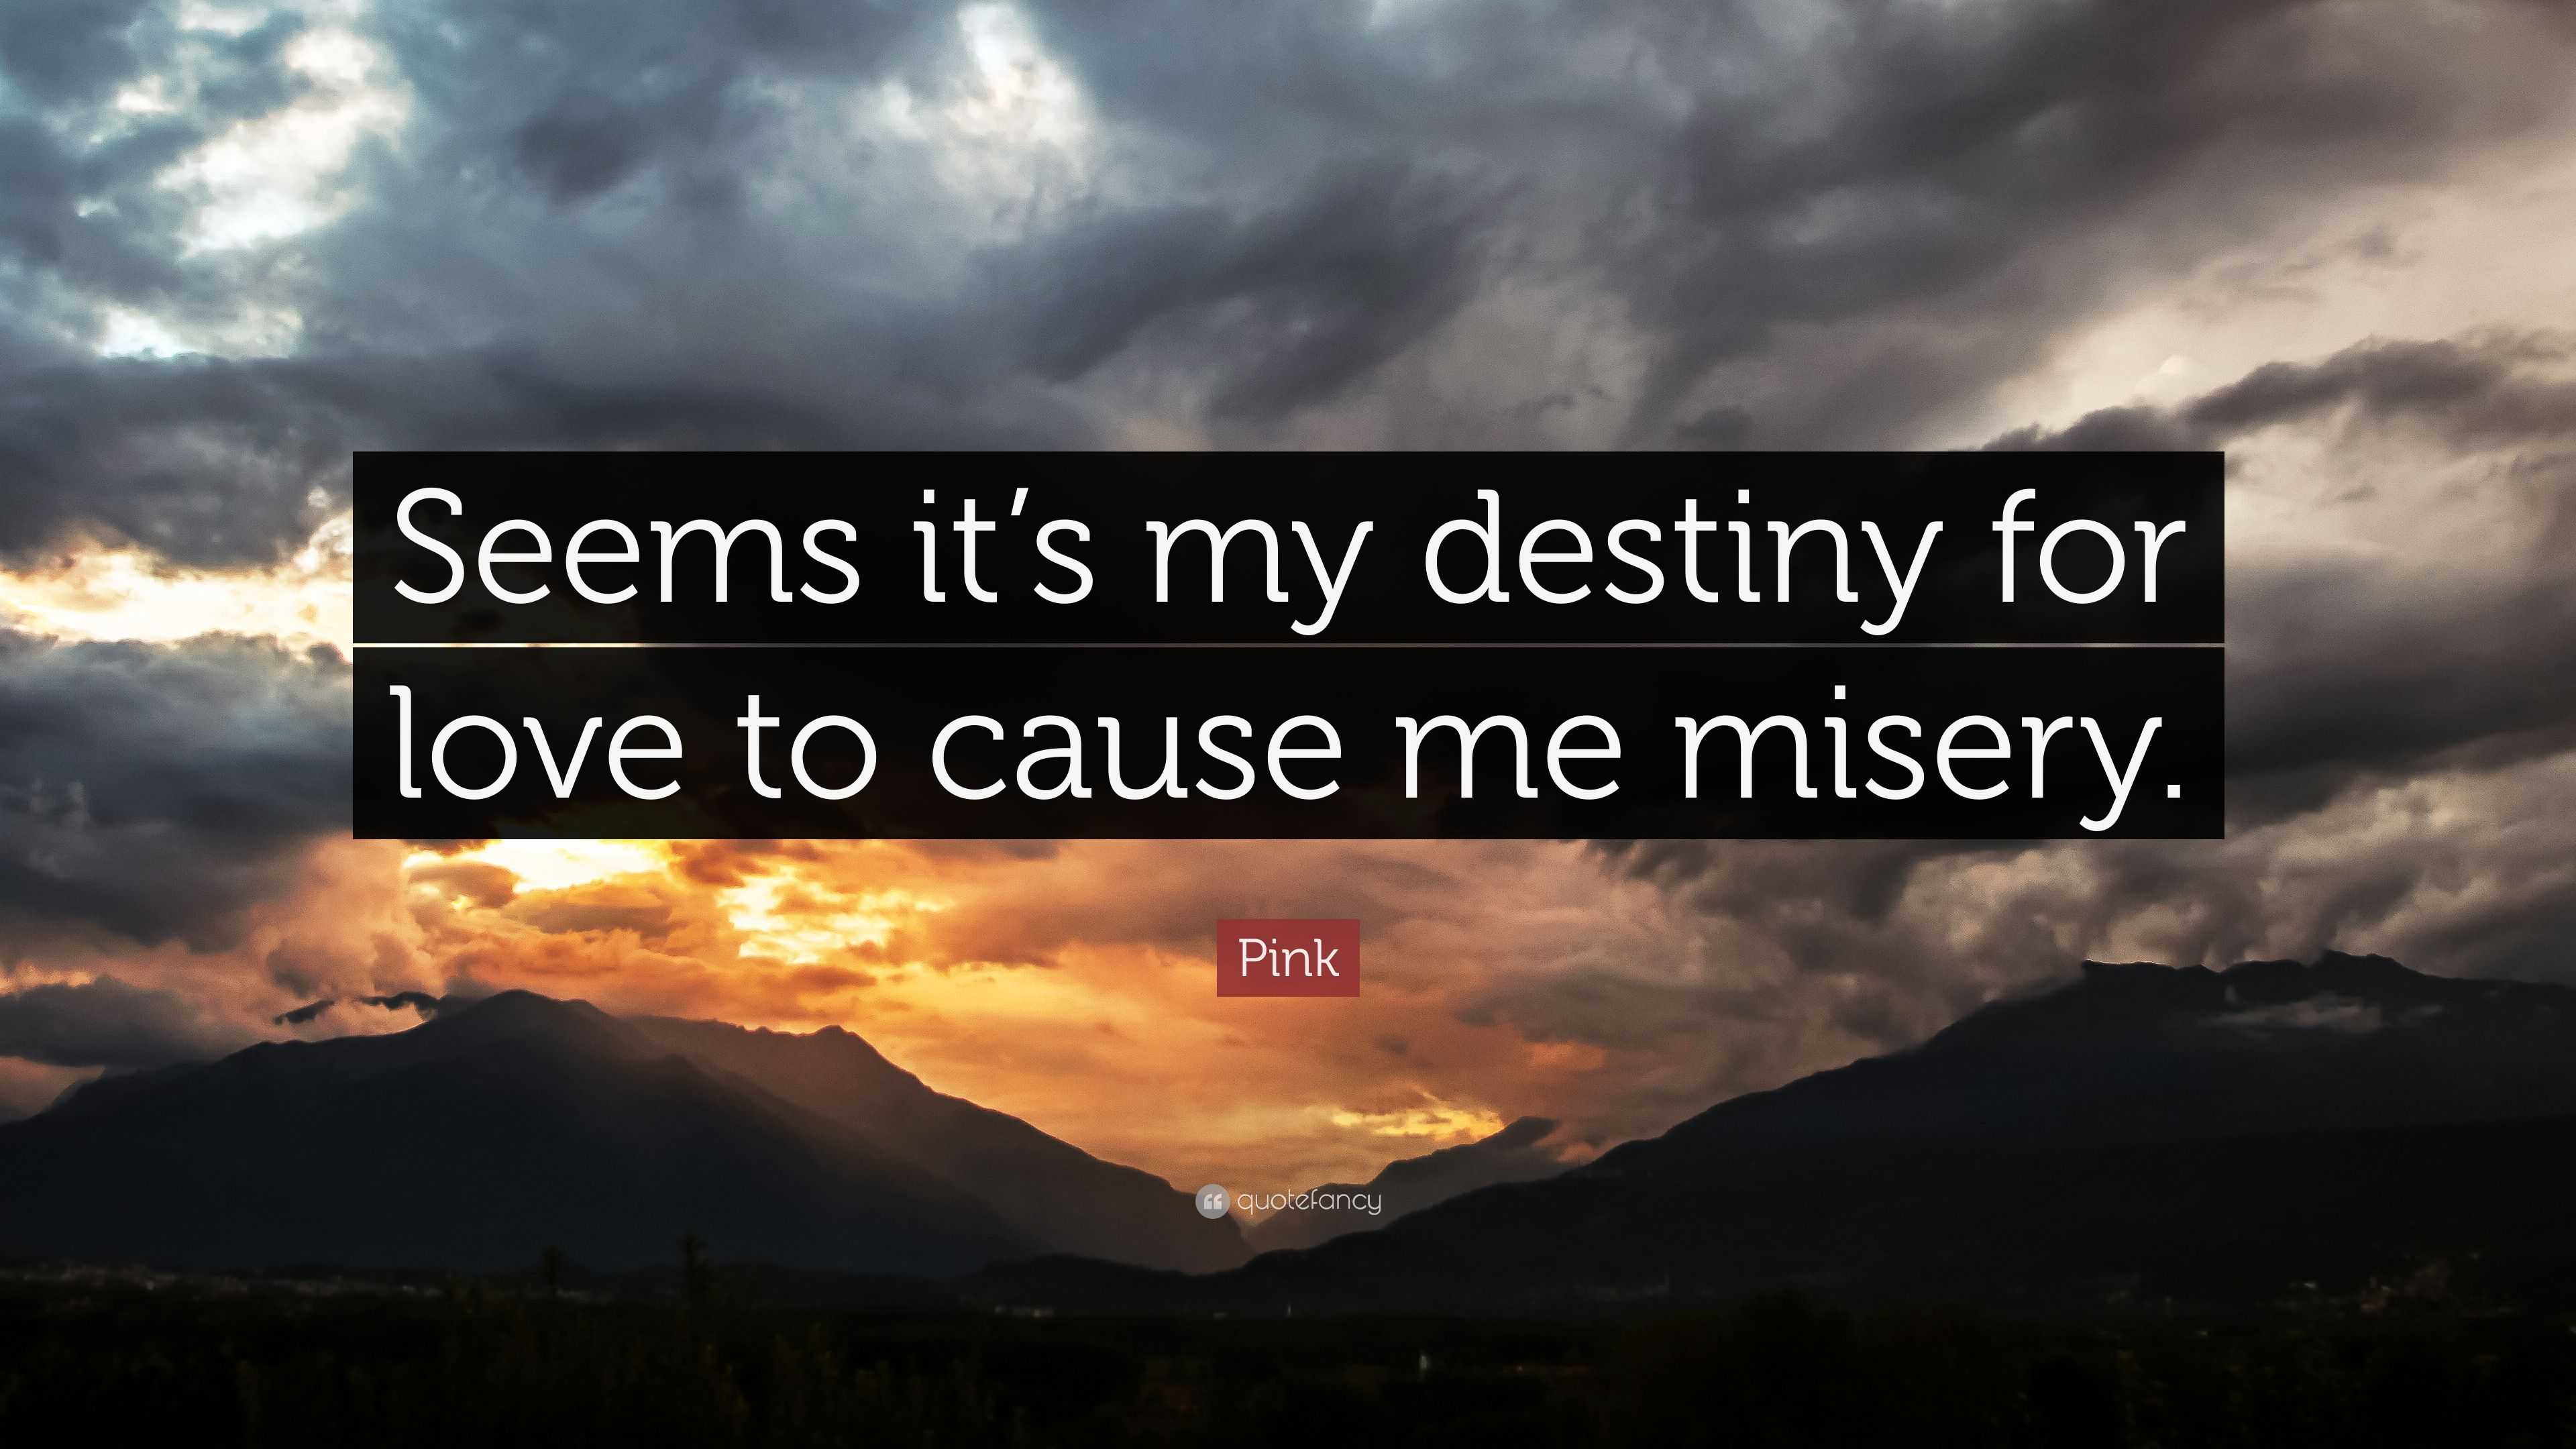 Pink Quote “Seems it s my destiny for love to cause me misery ”